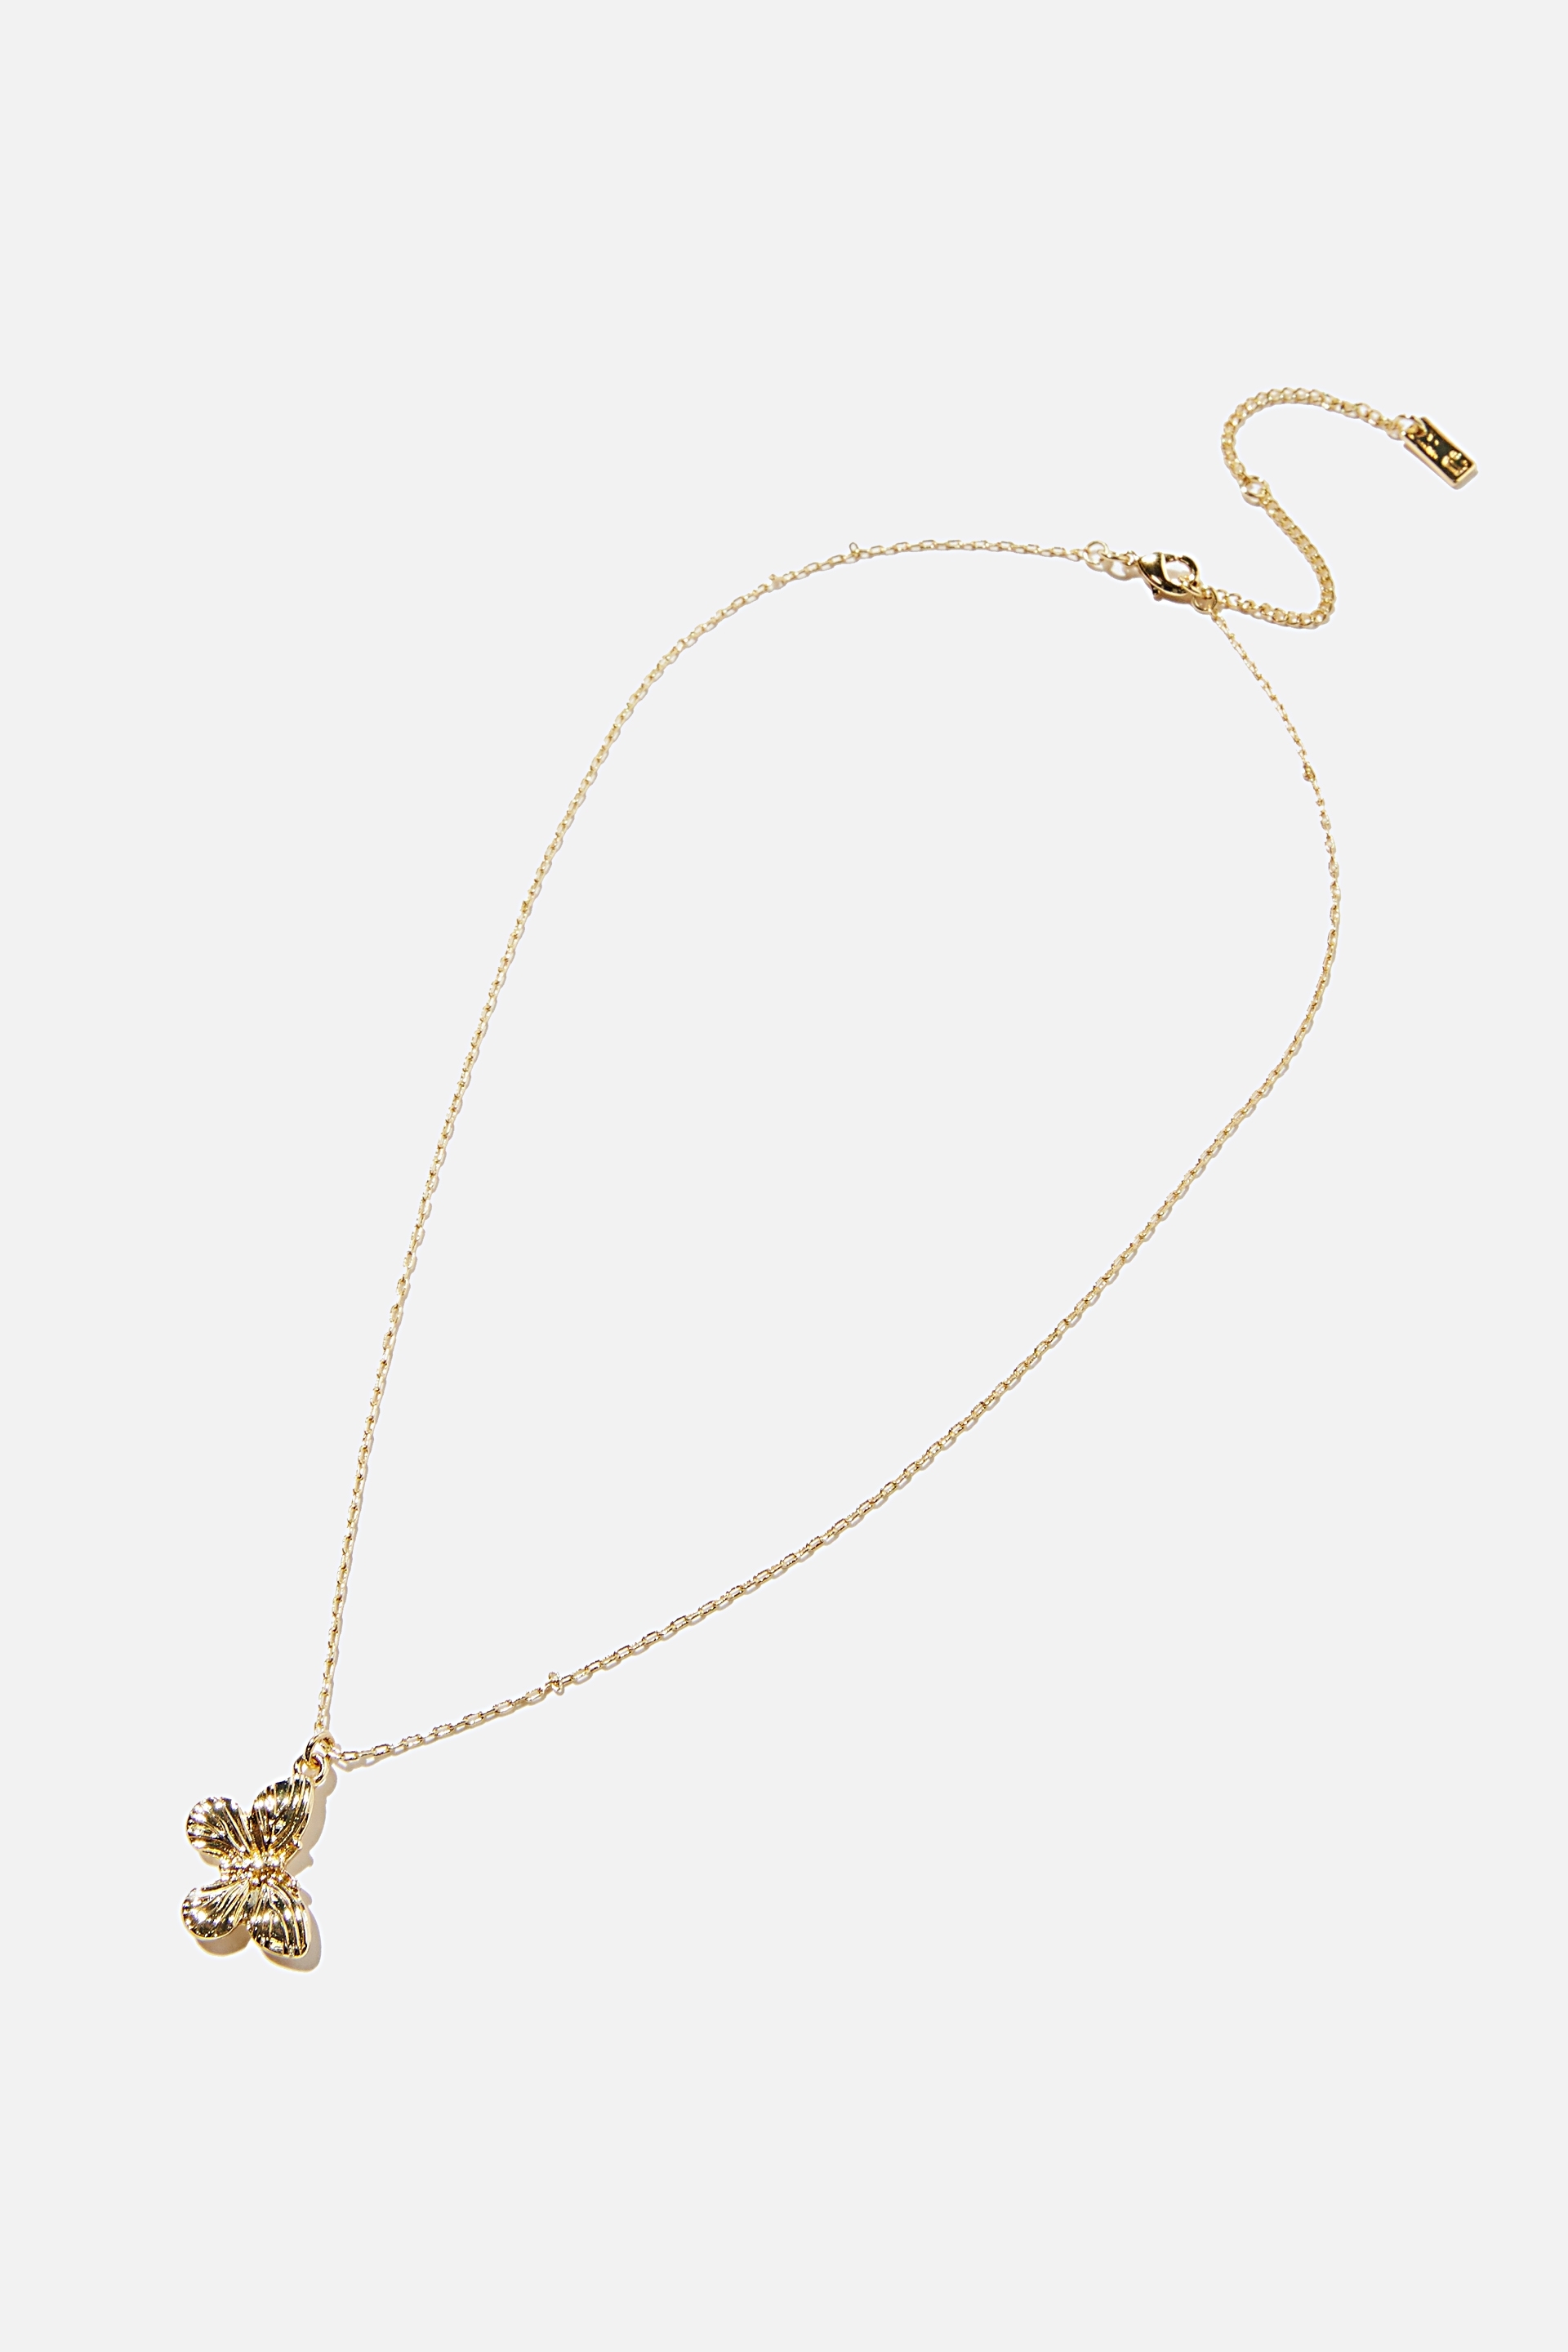 Rubi - Premium Pendant Necklace - Gold plated butterfly